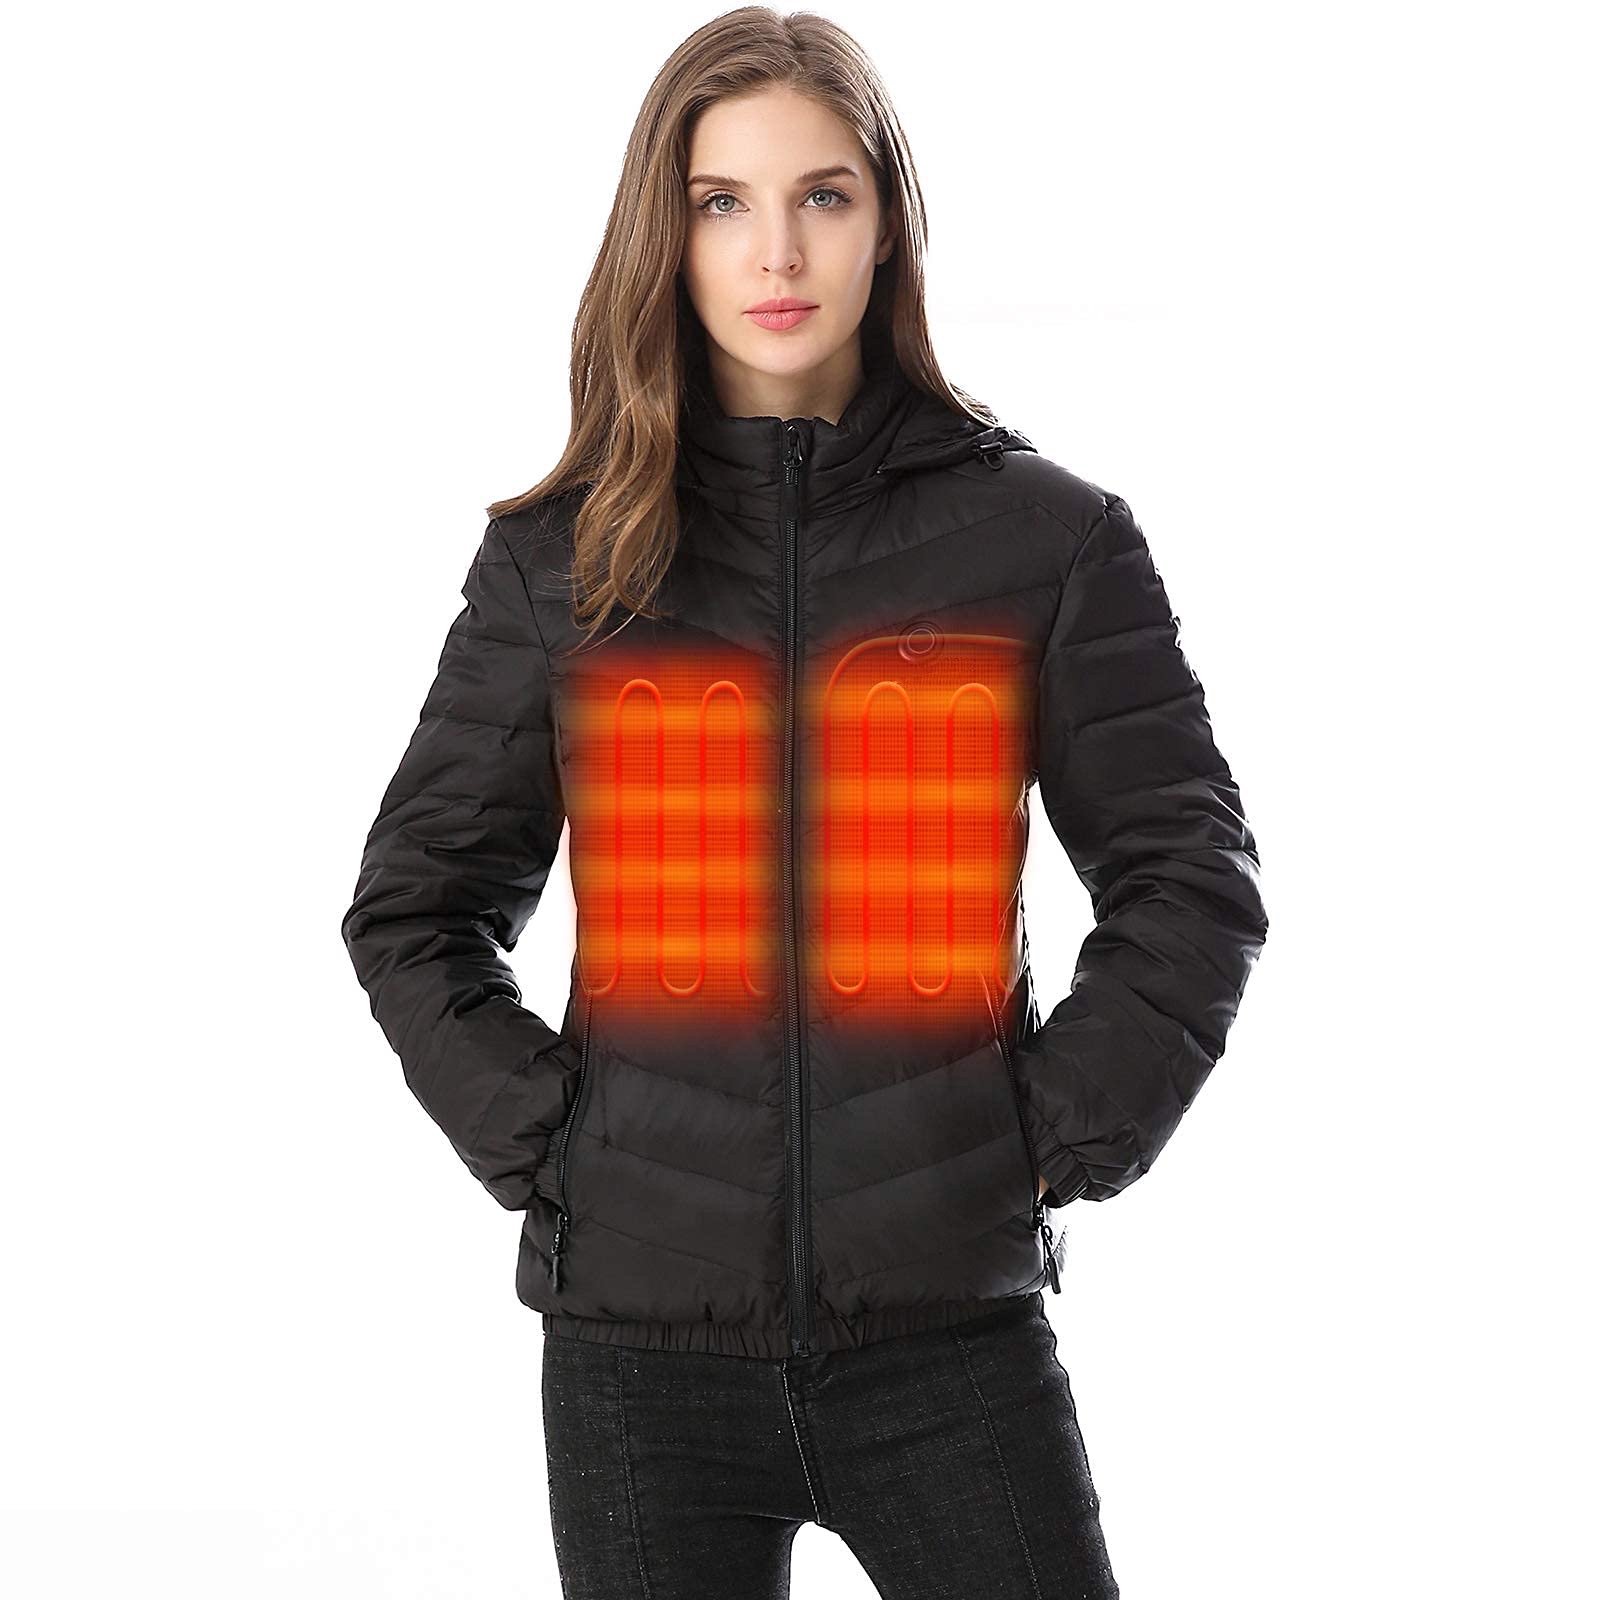 Women's Down Heated Jacket with Battery Pack 7.4V and Detachable Hood, 90% White Duck Down